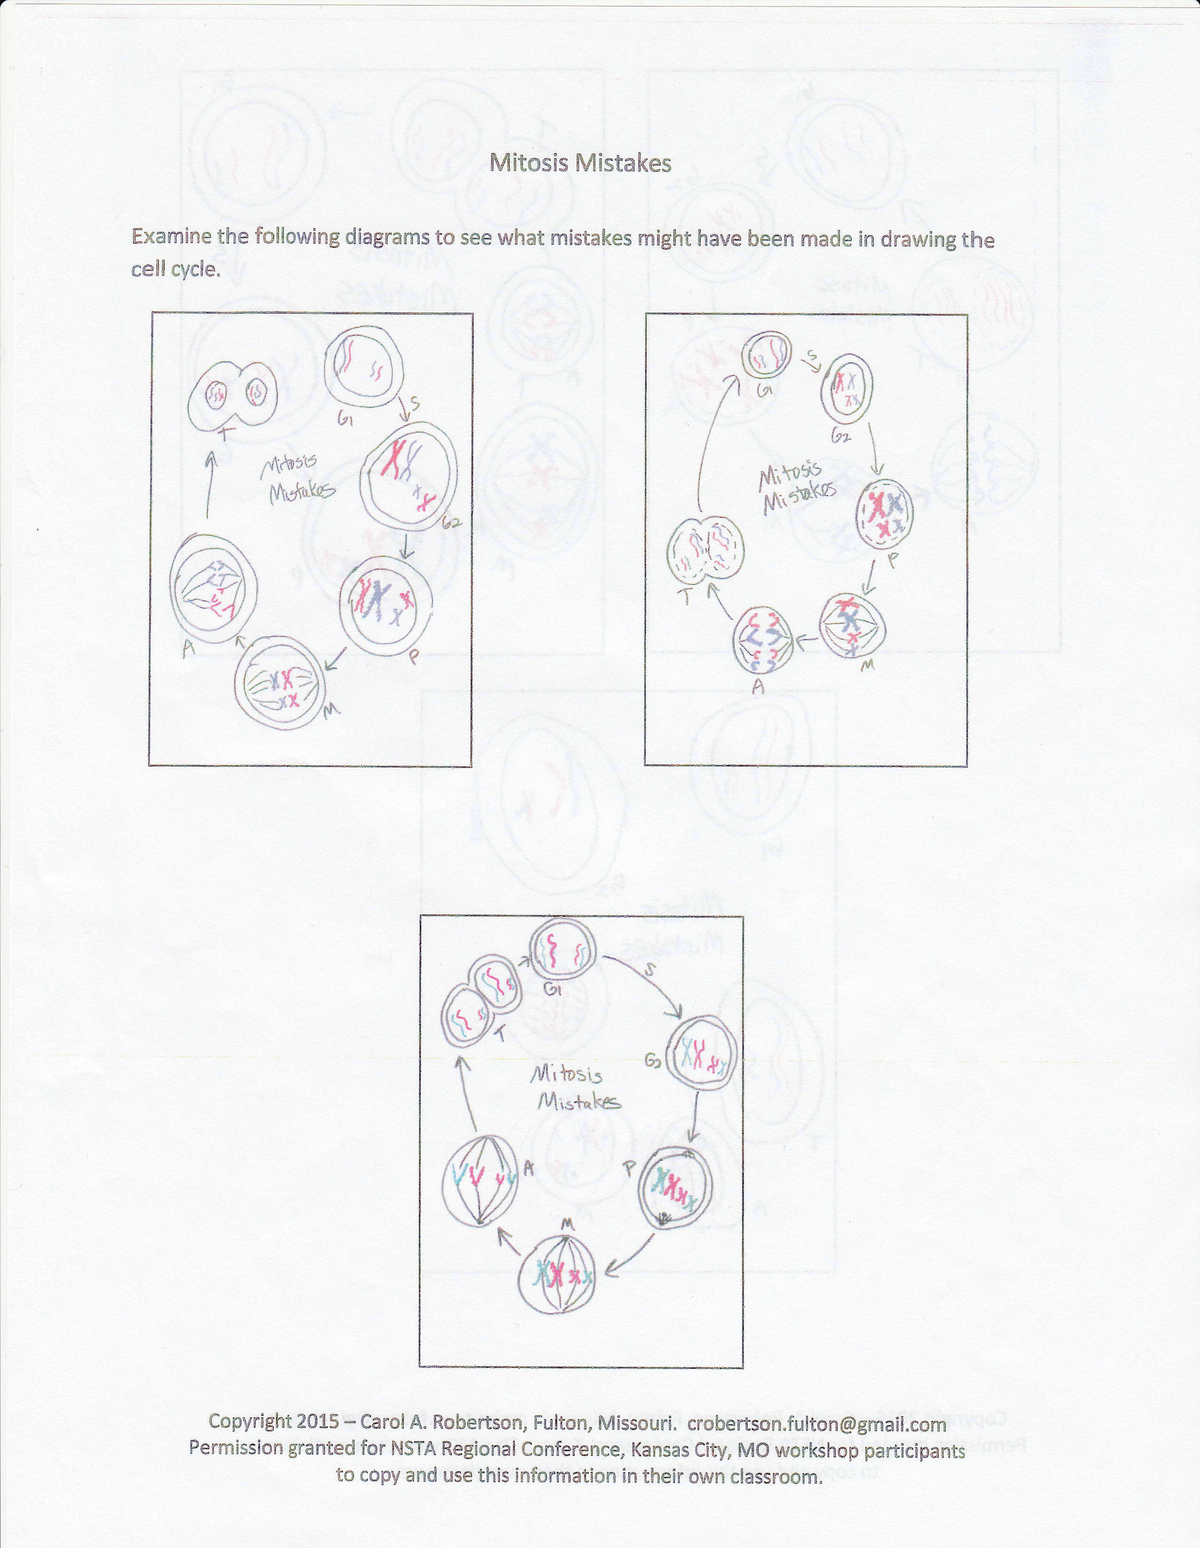 Mitosis Mistakes
Examine the following diagrams to see what mistakes might have been made in drawing the
cell cycle.
Mitosis
Mictakes
62
Mitosis
Mistakes
xx
A
G2
Mitosis
Mistakes
Copyright 2015- Carol A. Robertson, Fulton, Missouri. crobertson.fulton@gmail.com
Permission granted for NSTA Regional Conference, Kansas City, MO workshop participants
to copy and use this information in their own classroom.
%24
